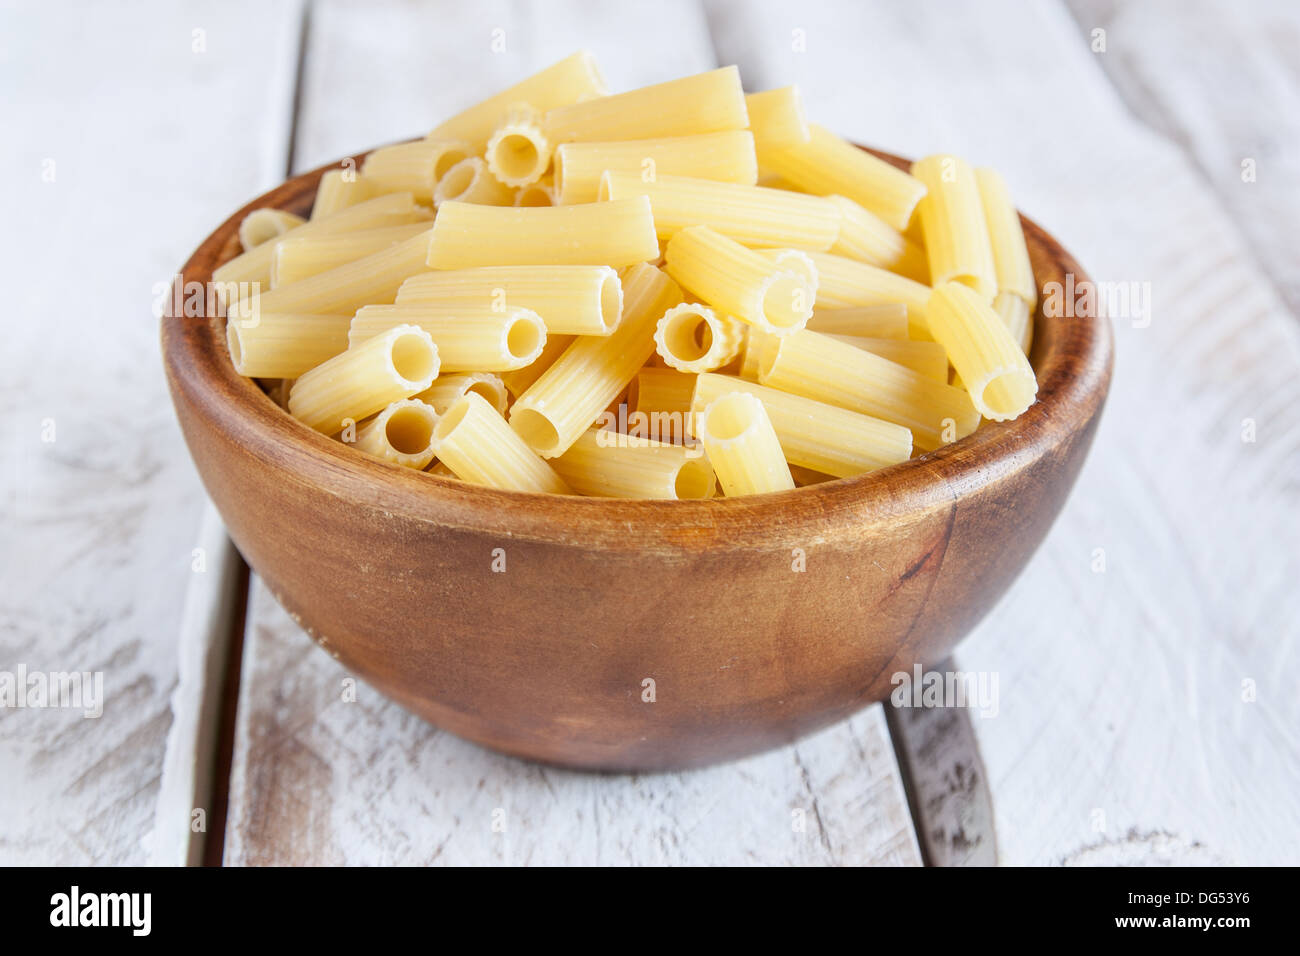 Uncooked rigatoni bowl on wooden table Stock Photo